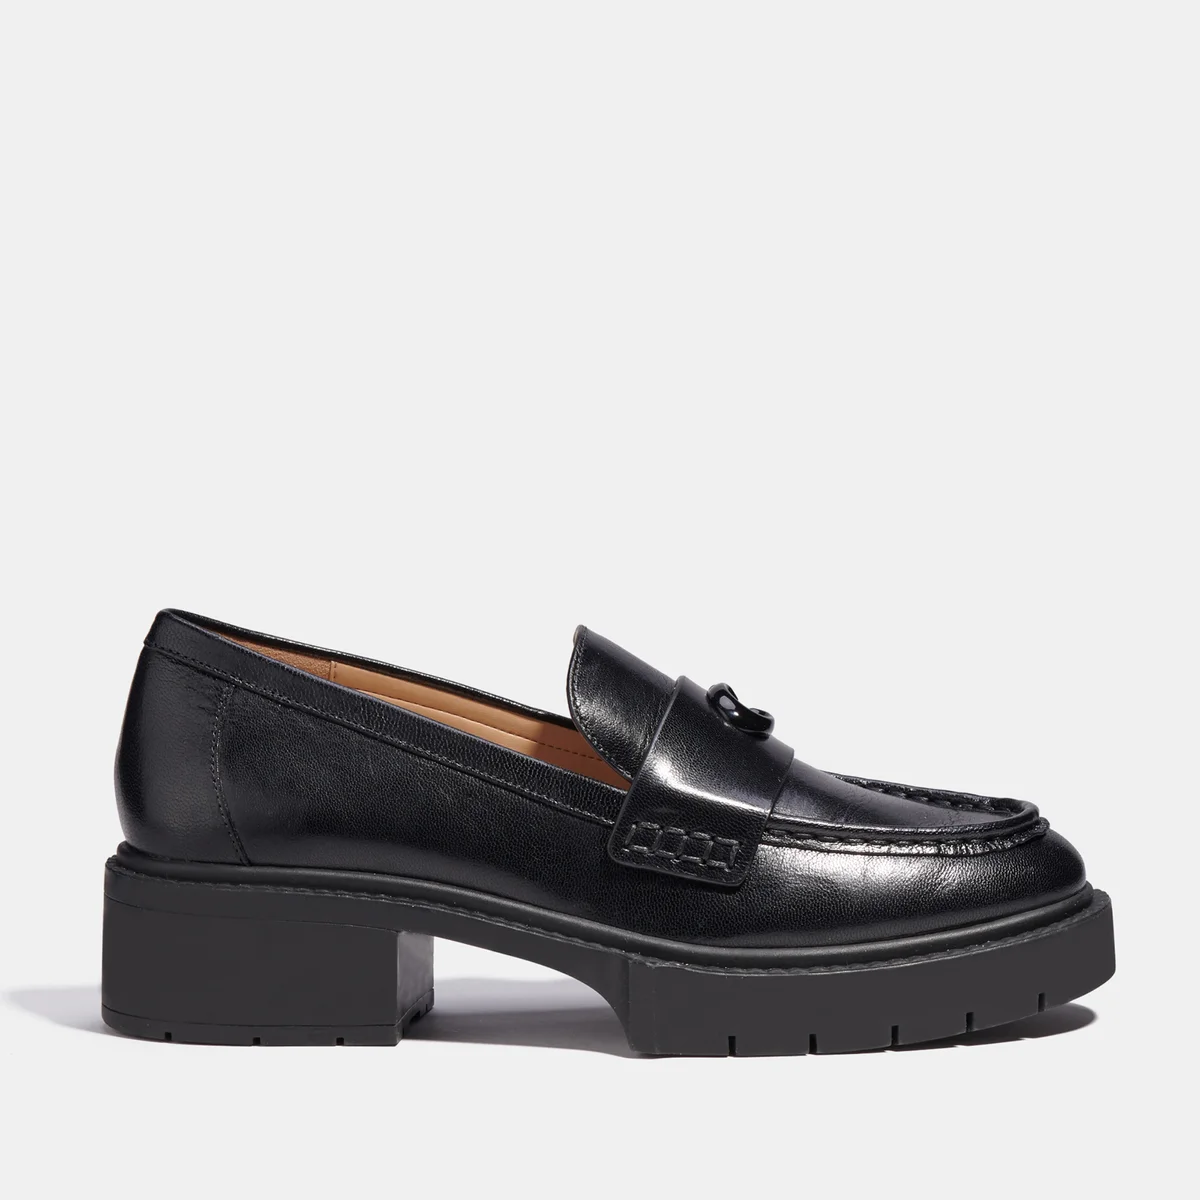 Coach Leah Leather Loafers Image 1